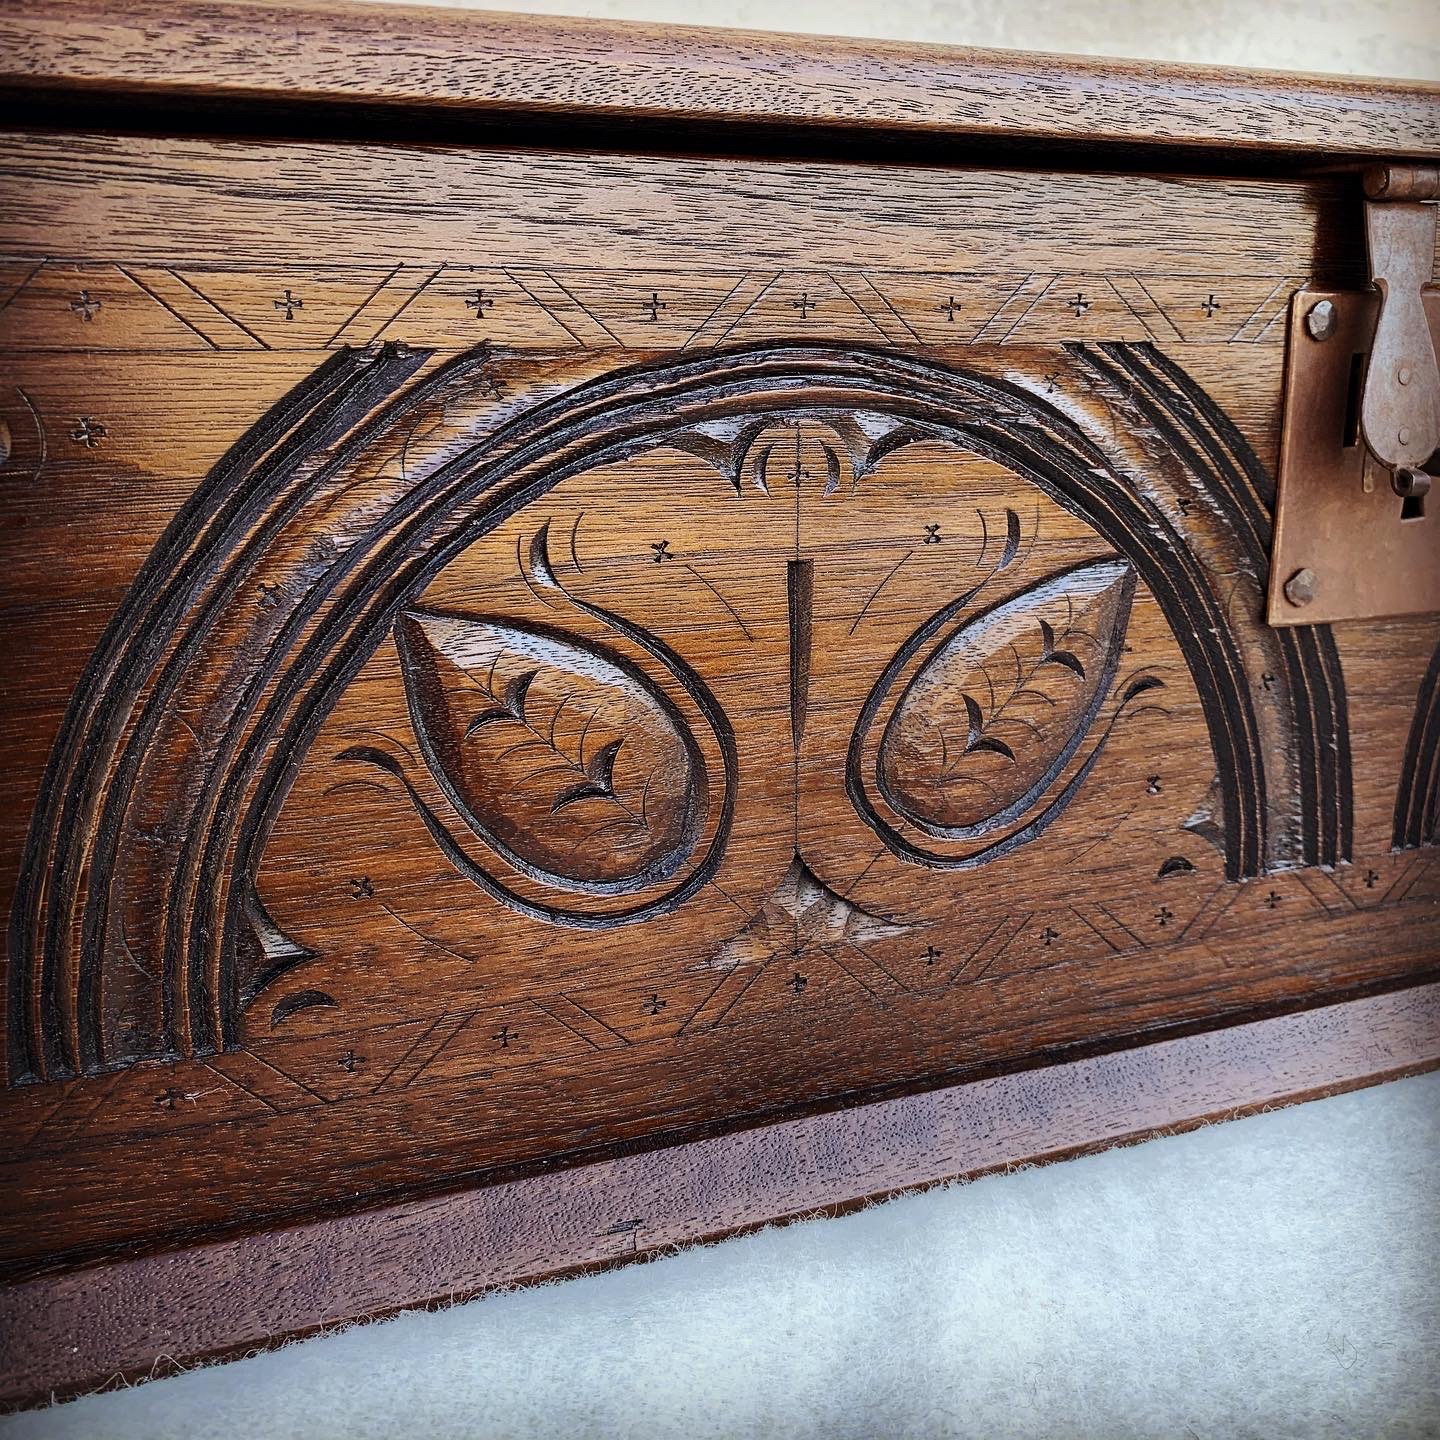 Detail of carved walnut box